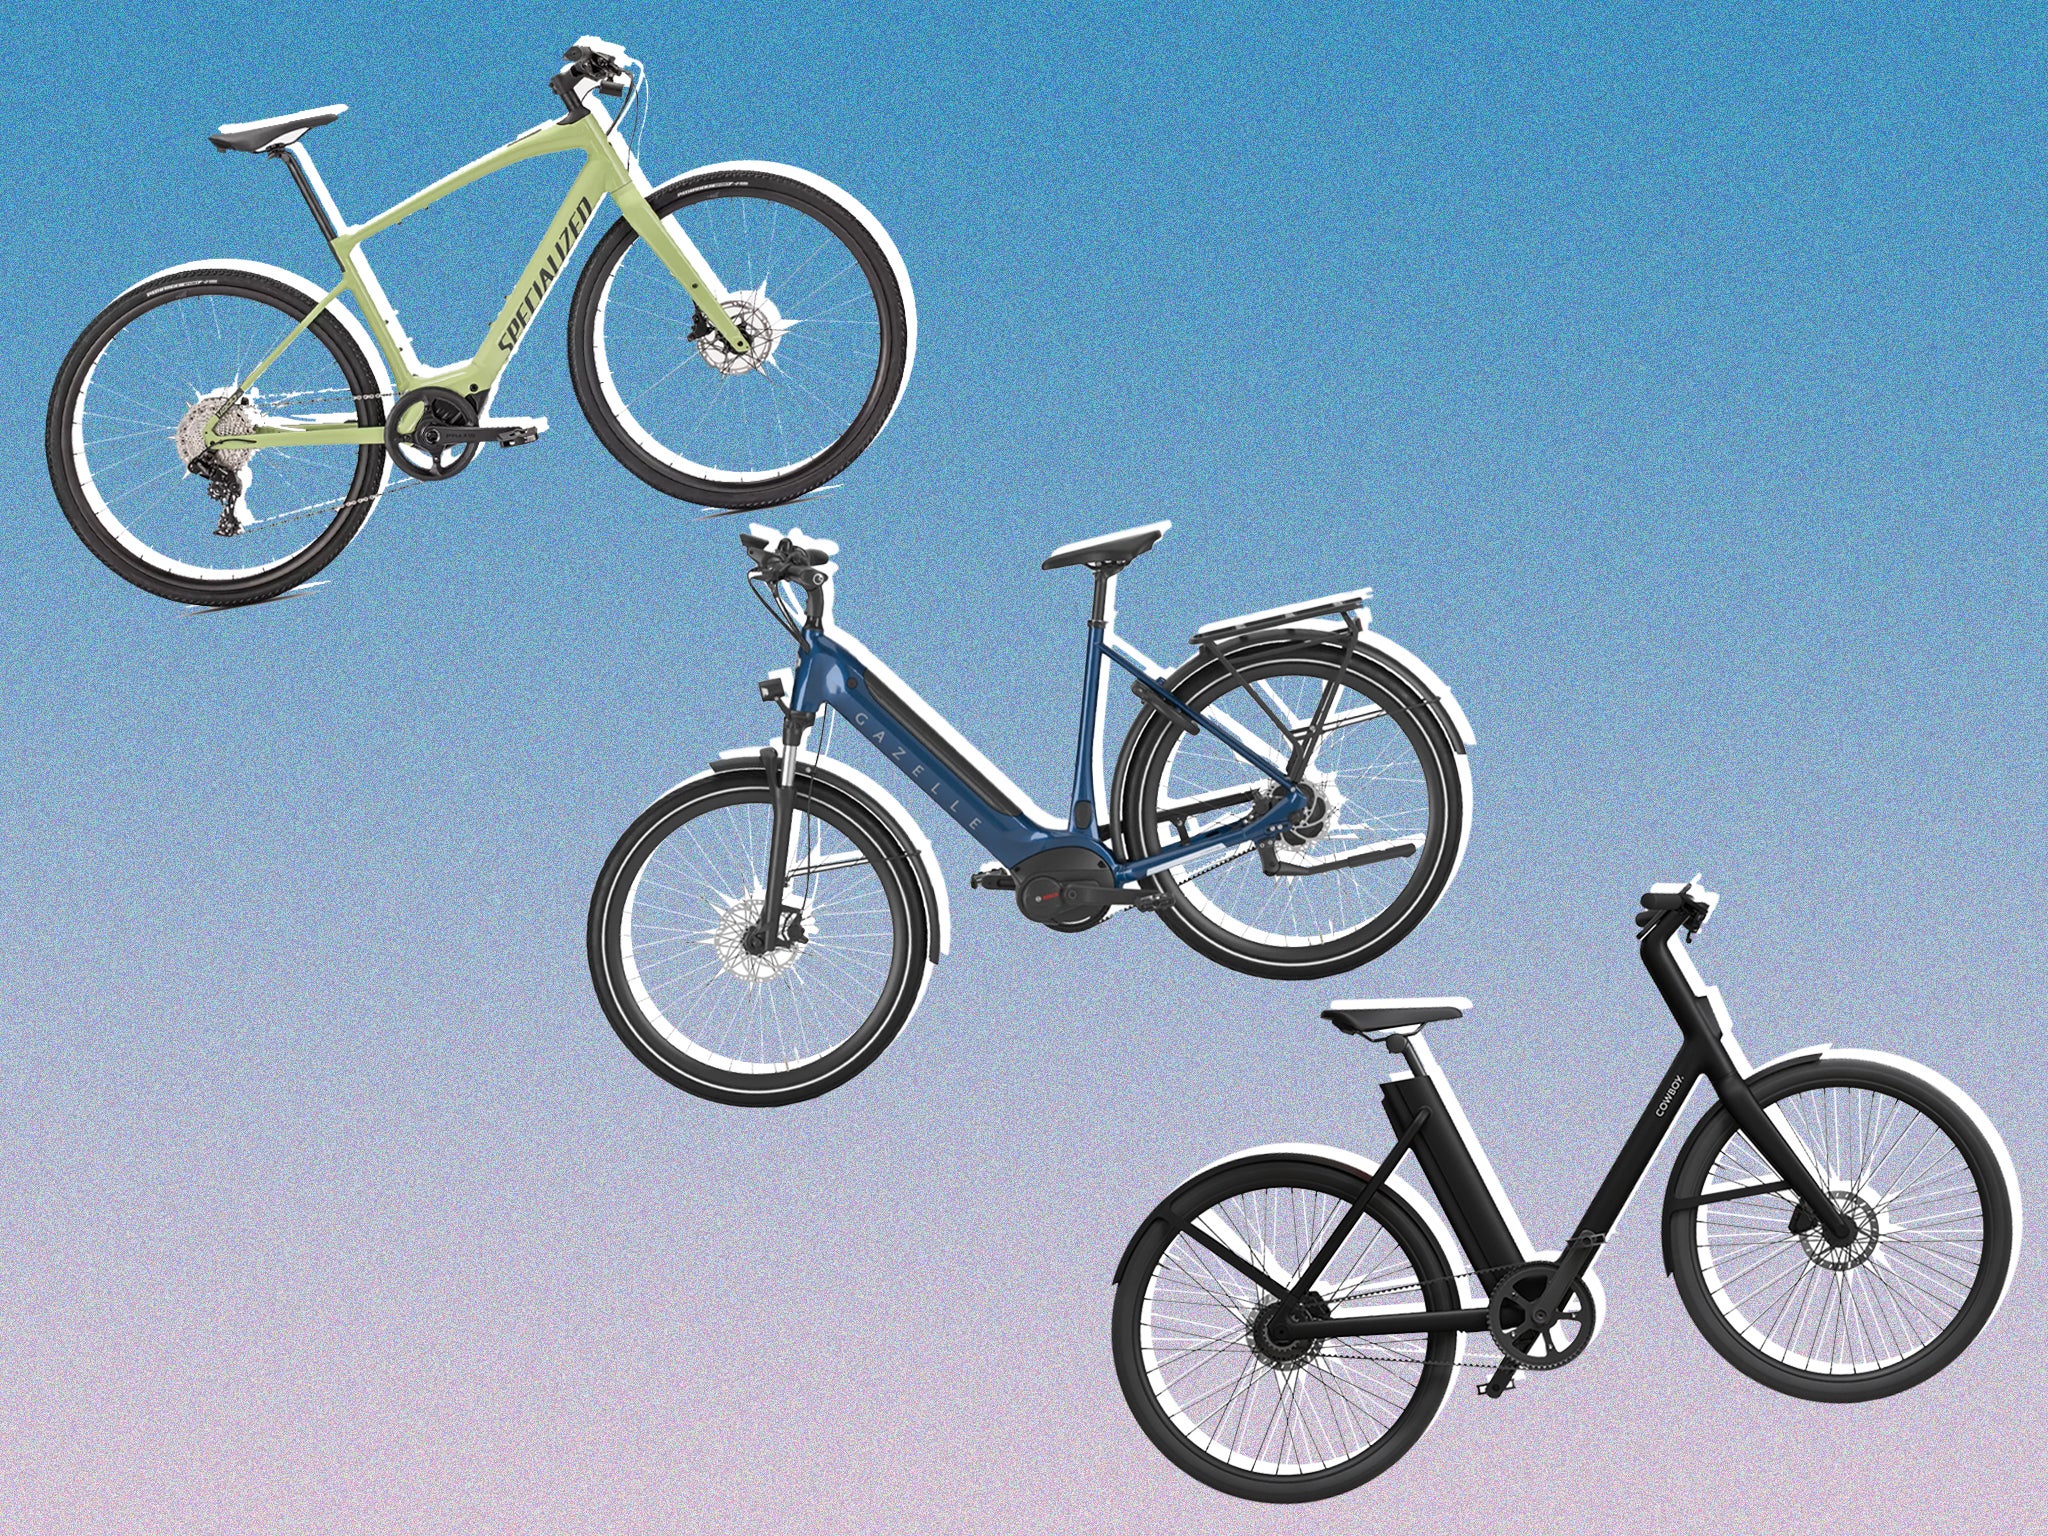 Travel in Style The Year's Top Rated Electric Bikes